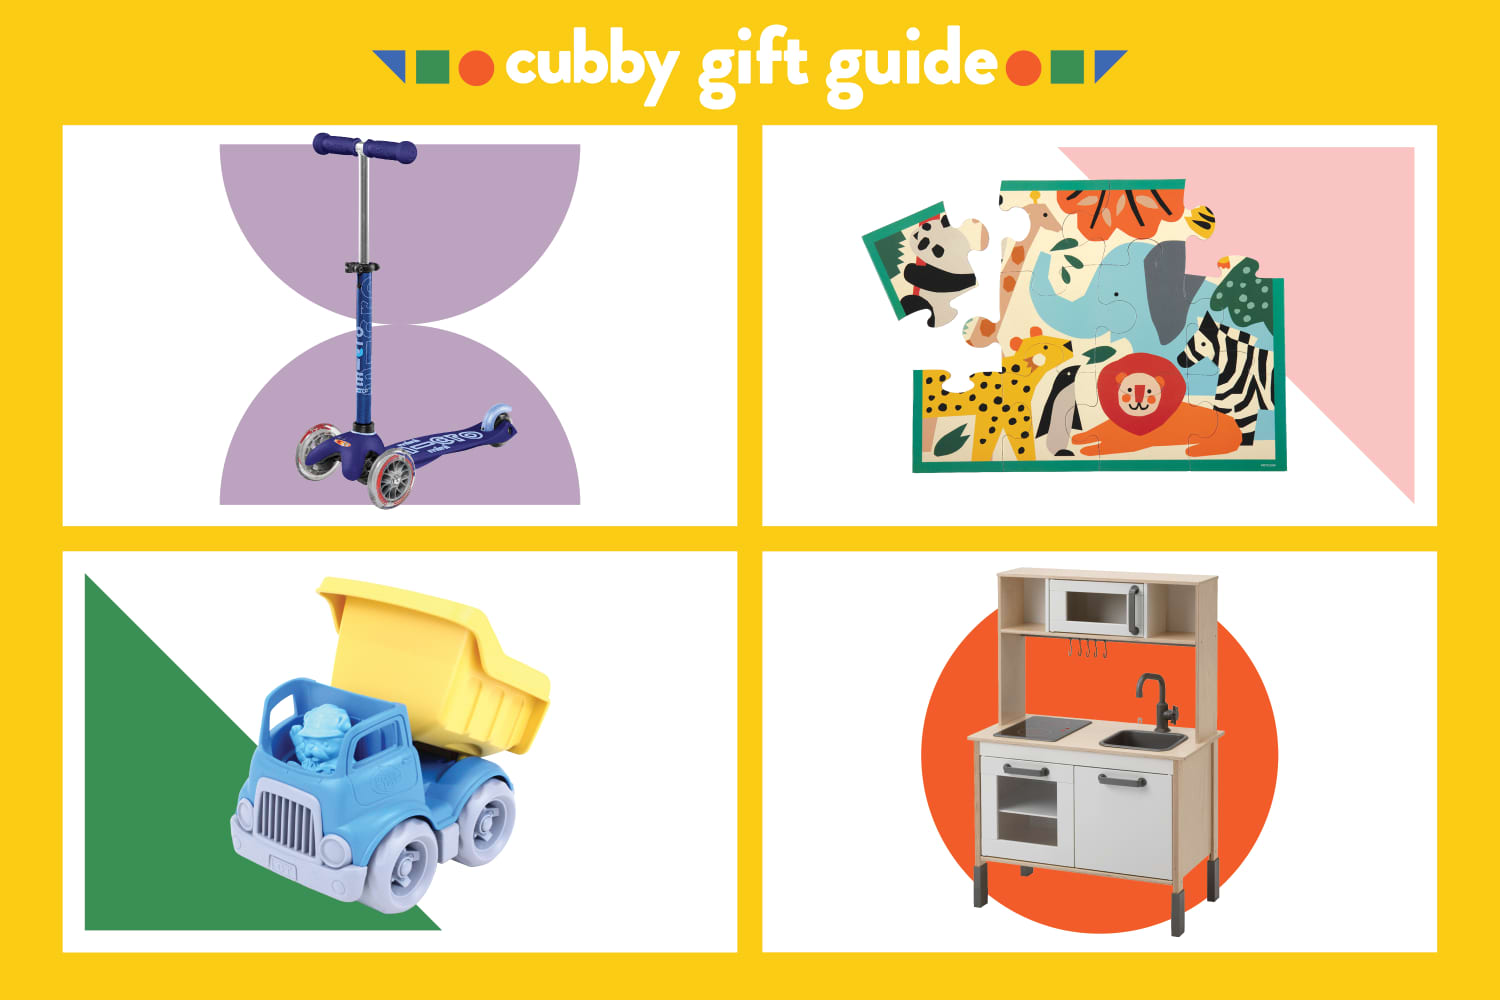 The 25 Best Toys for 2 Year Olds (They Make Great Gifts!)